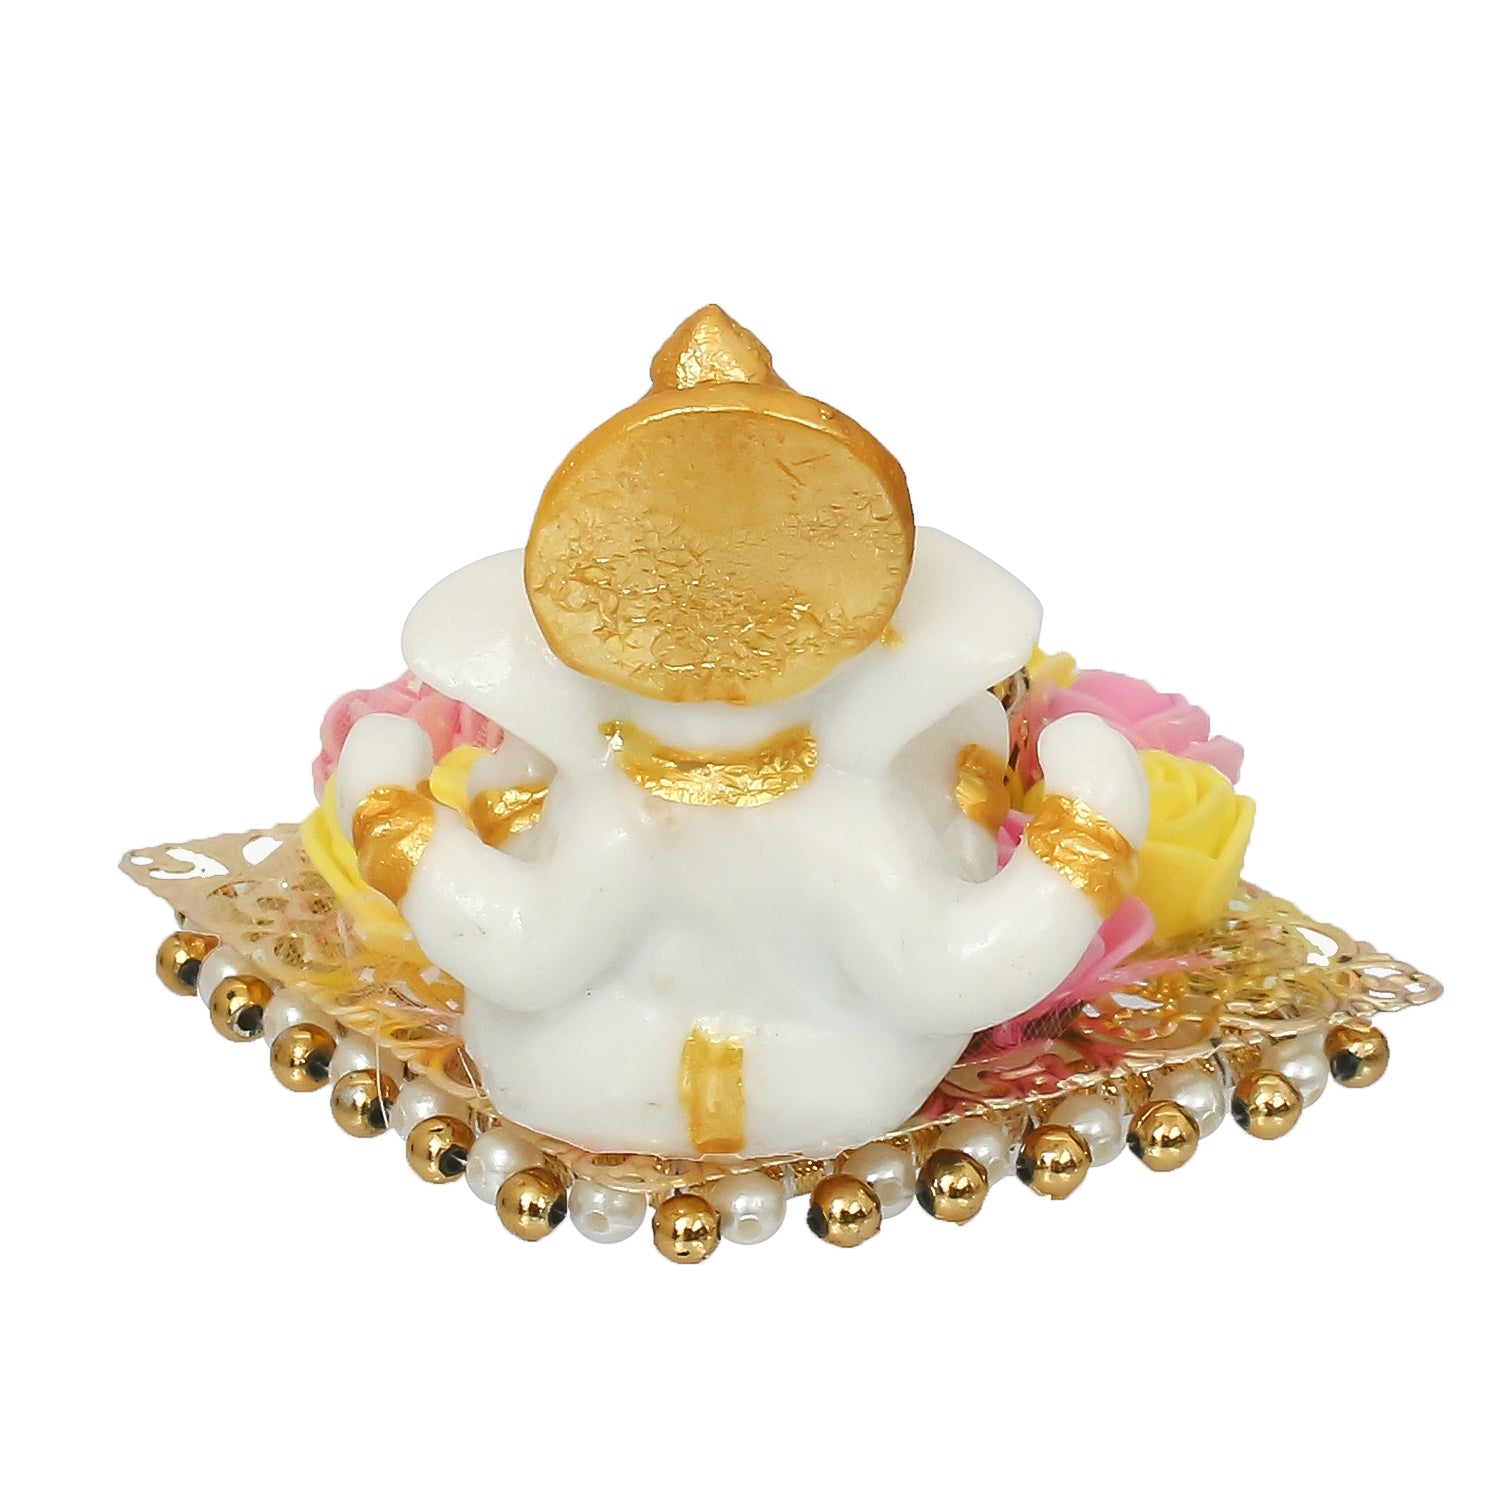 Polyresin Lord Ganesha Idol on Decorative Metal Plate with Tea Light Holder (Pink, Yellow and White) 5